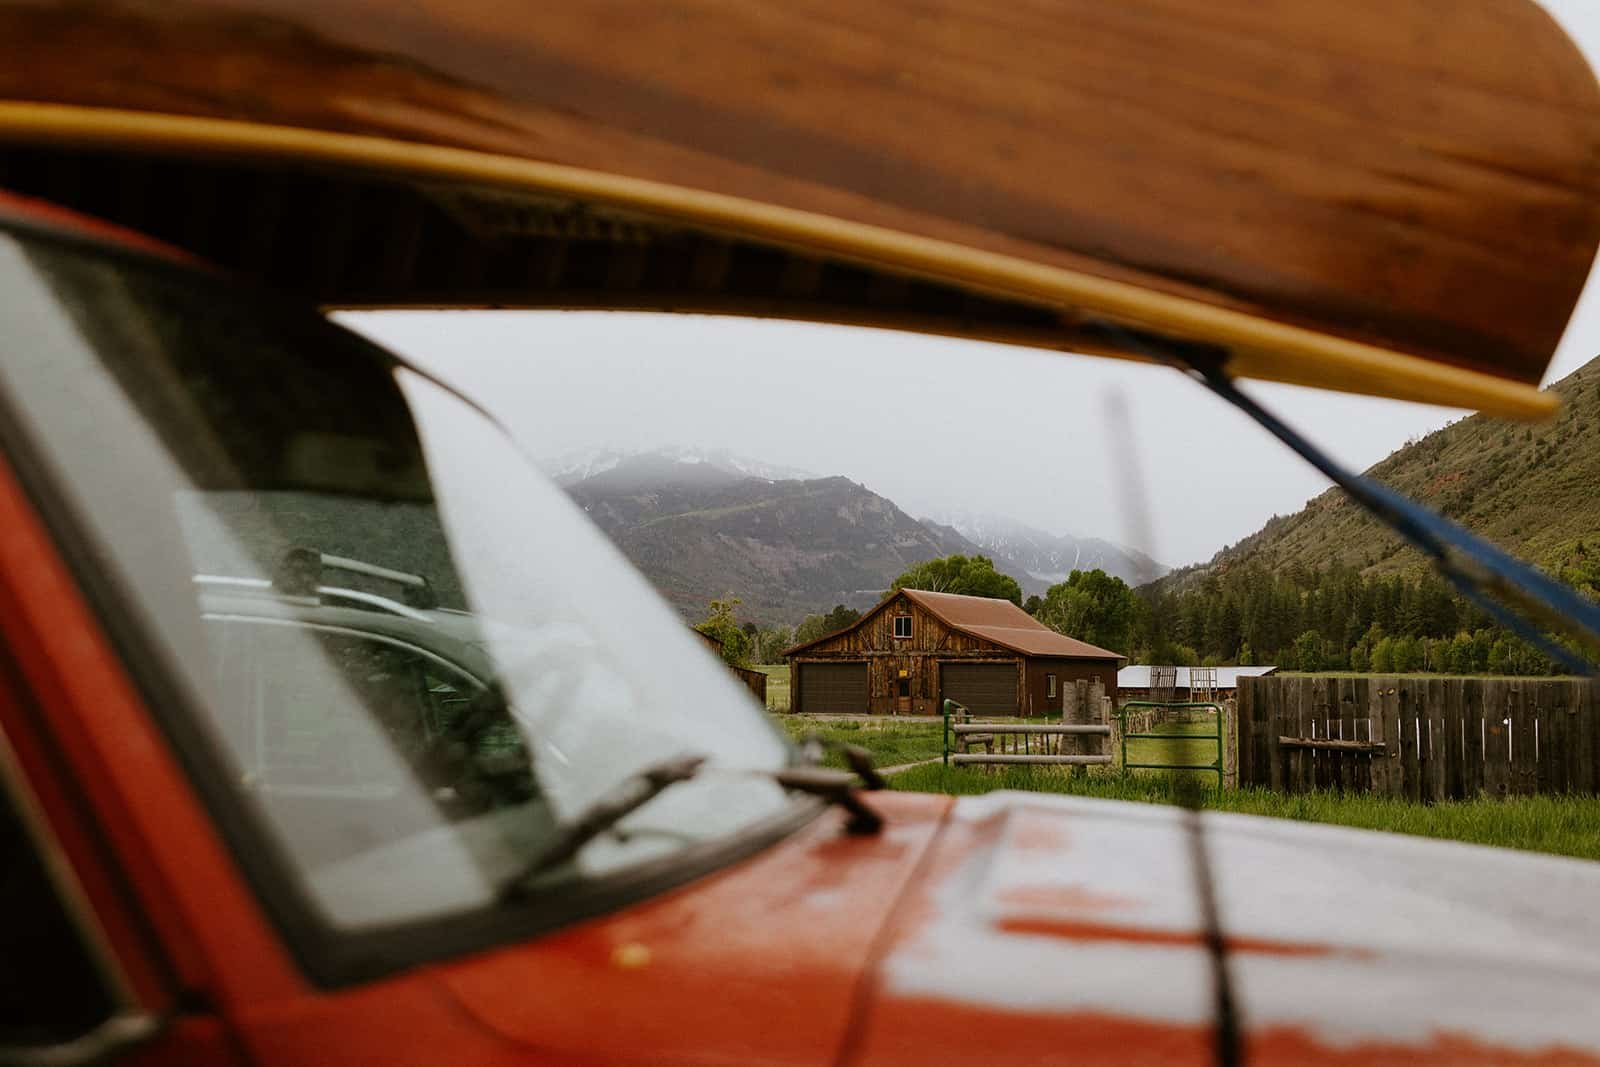 A view of a barn and the San Juan mountains through a red Land Cruiser with a canoe on top